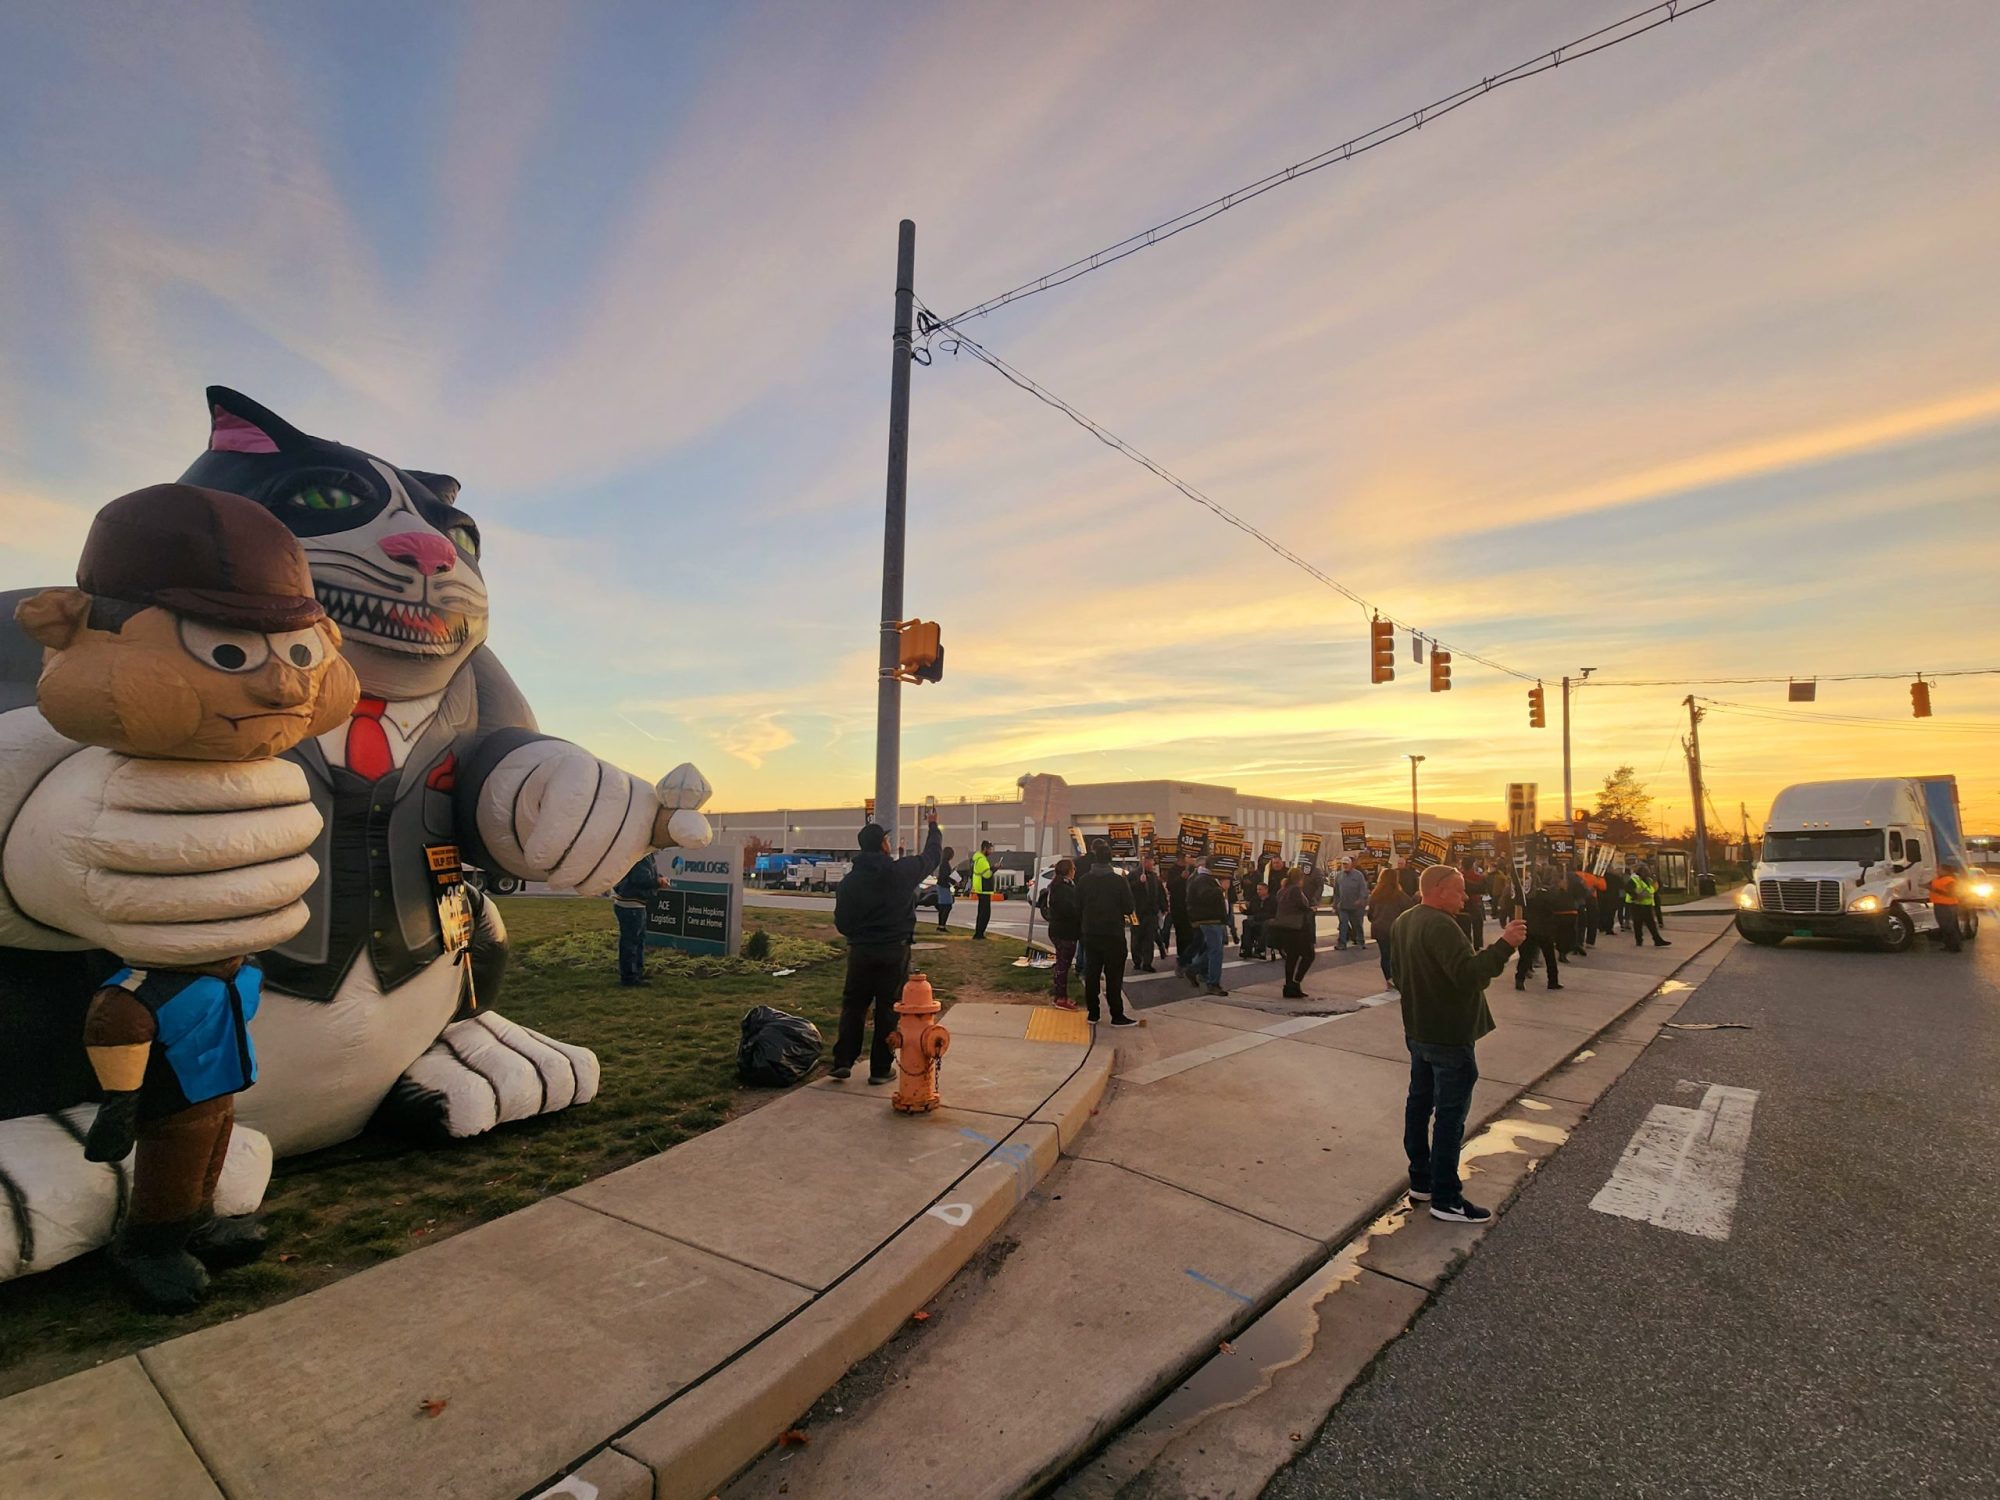 A group of dozens of Teamsters and local community members walk a picket line at sunset outside Amazon's BWI5 warehouse in Baltimore on Wednesday, Nov. 8, 2023. On the corner of the intersection stands a "Fat Cat" blowup doll. Photo by Maximillian Alvarez.